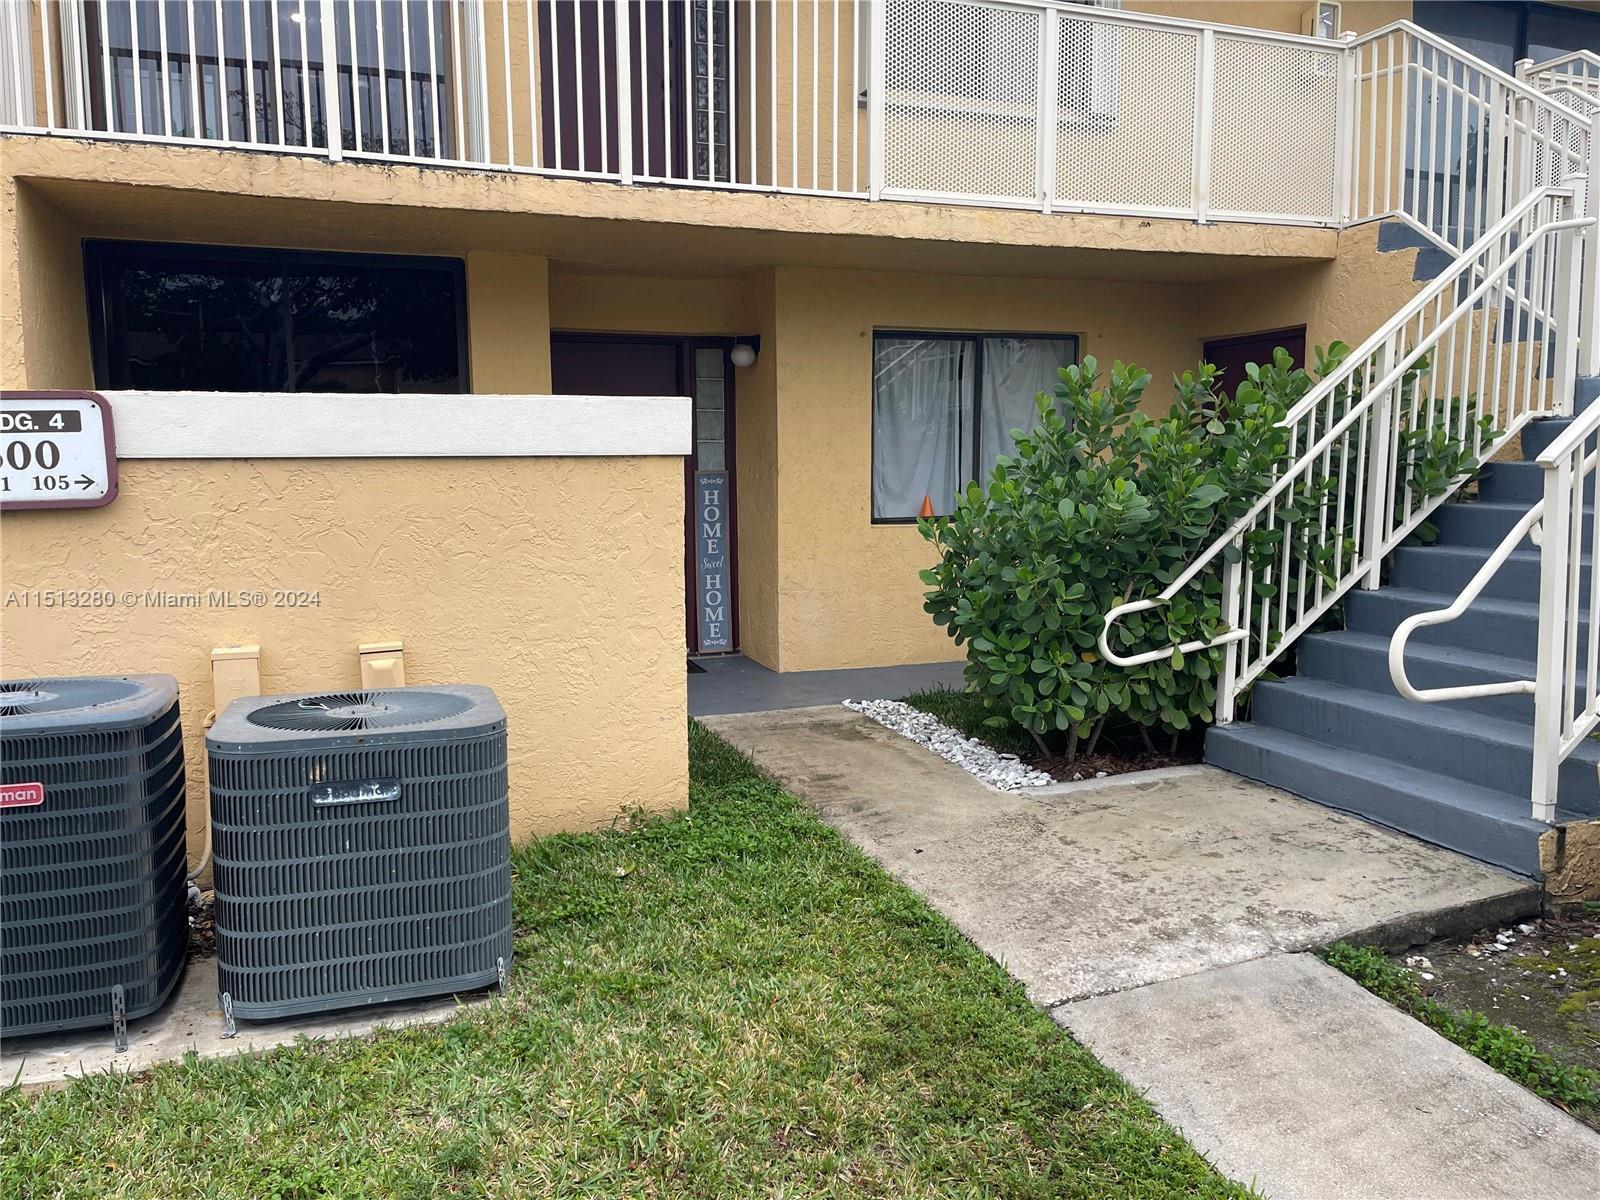 Photo of 600 NW 214th St #104 in Miami Gardens, FL